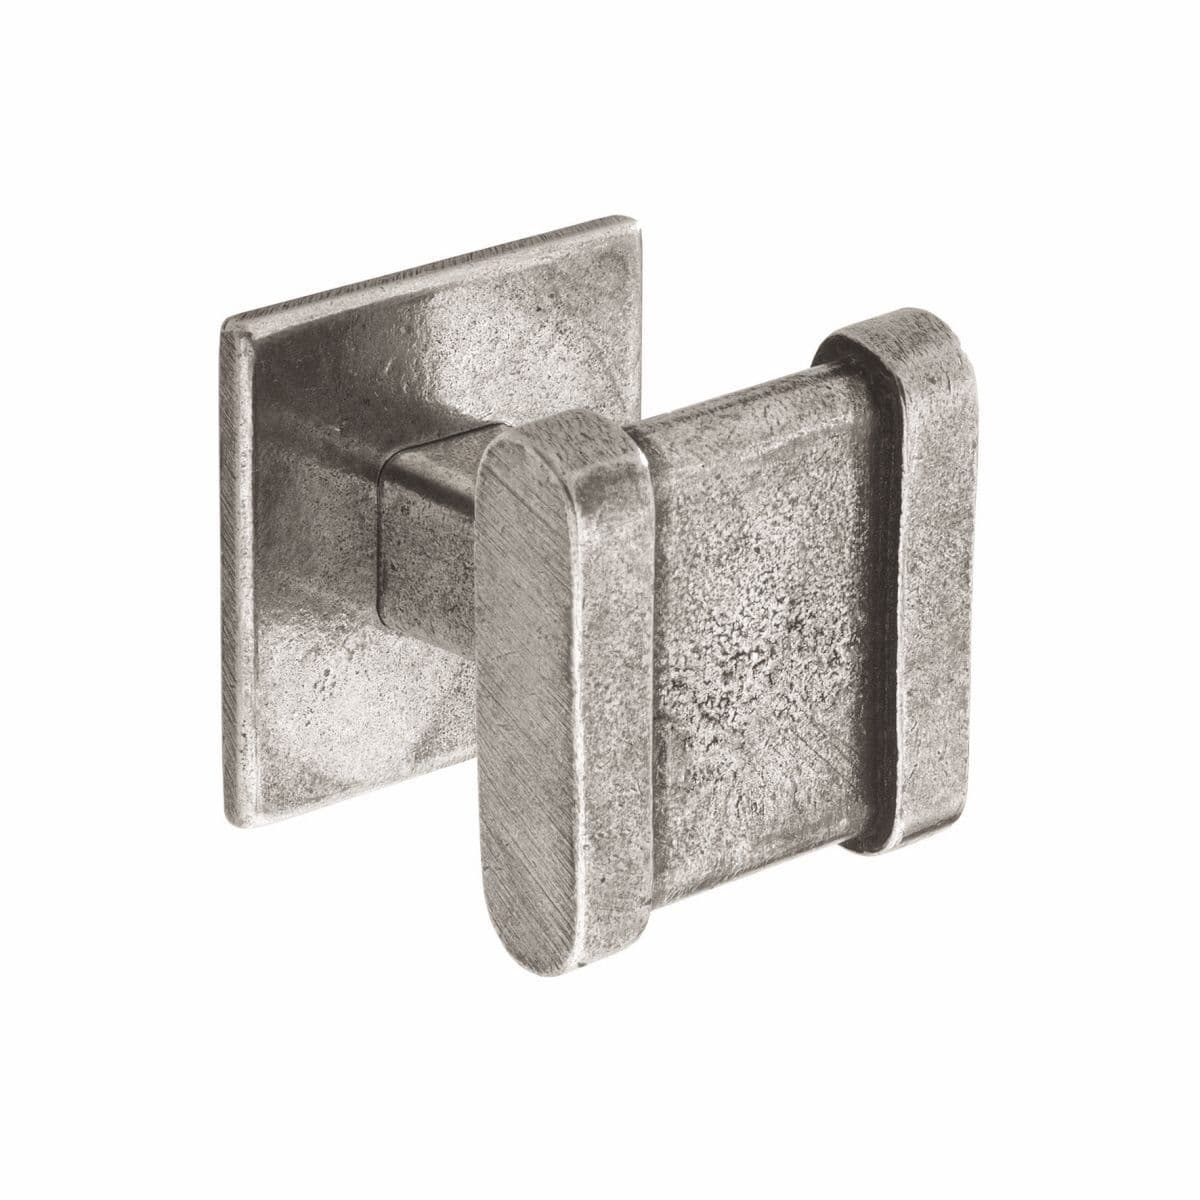 HAMPSHIRE SQUARE KNOB Cupboard Handle - 32mm x 32mm - POLISHED PEWTER finish (PWS K886.30.PE)